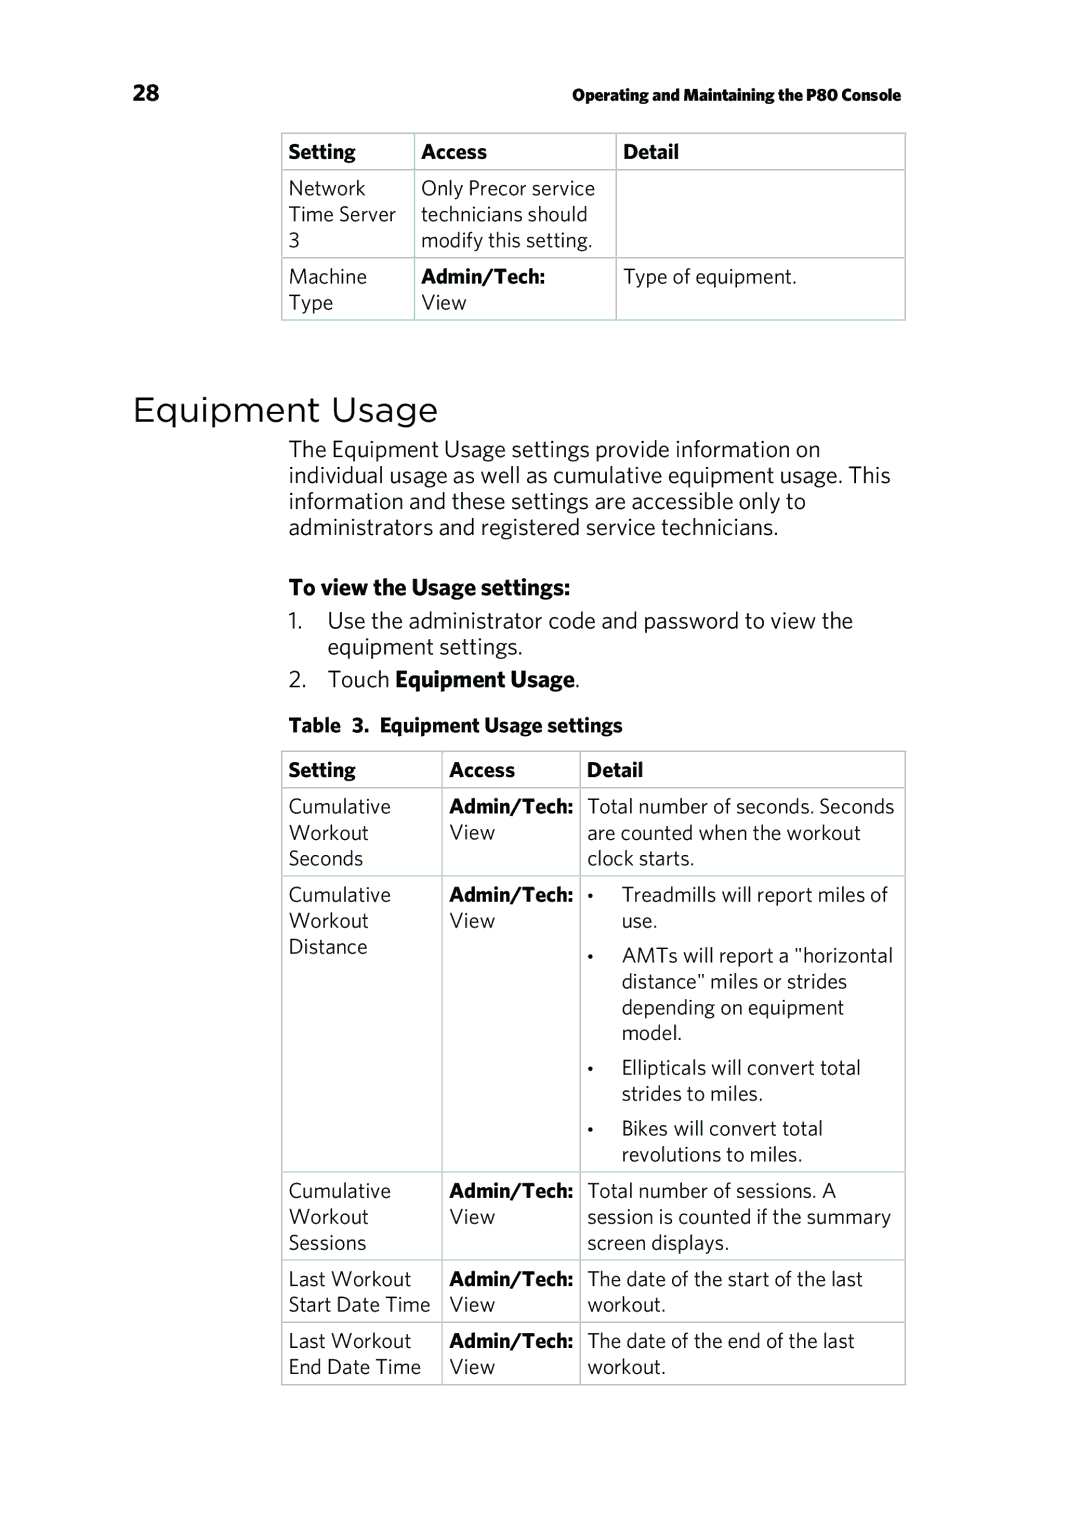 Precor P80 manual To view the Usage settings, Touch Equipment Usage, Setting Access Detail 